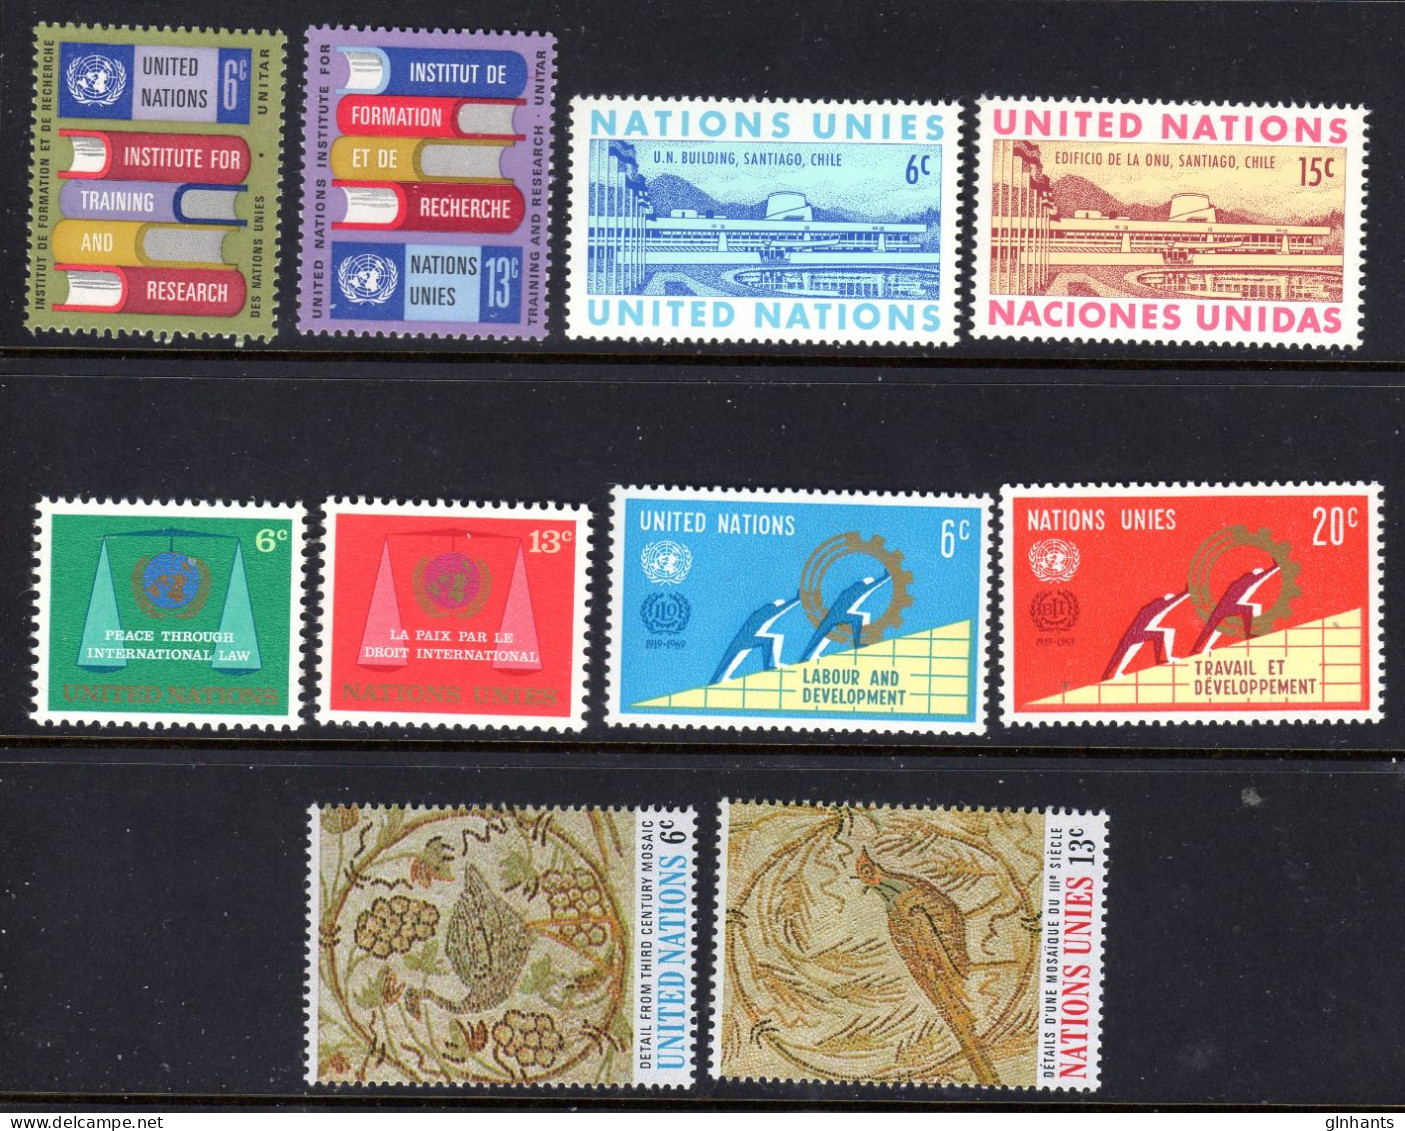 UNITED NATIONS UN NEW YORK - 1969 COMPLETE YEAR SET (10V) AS PICTURED FINE MNH ** SG 193-202 - Neufs